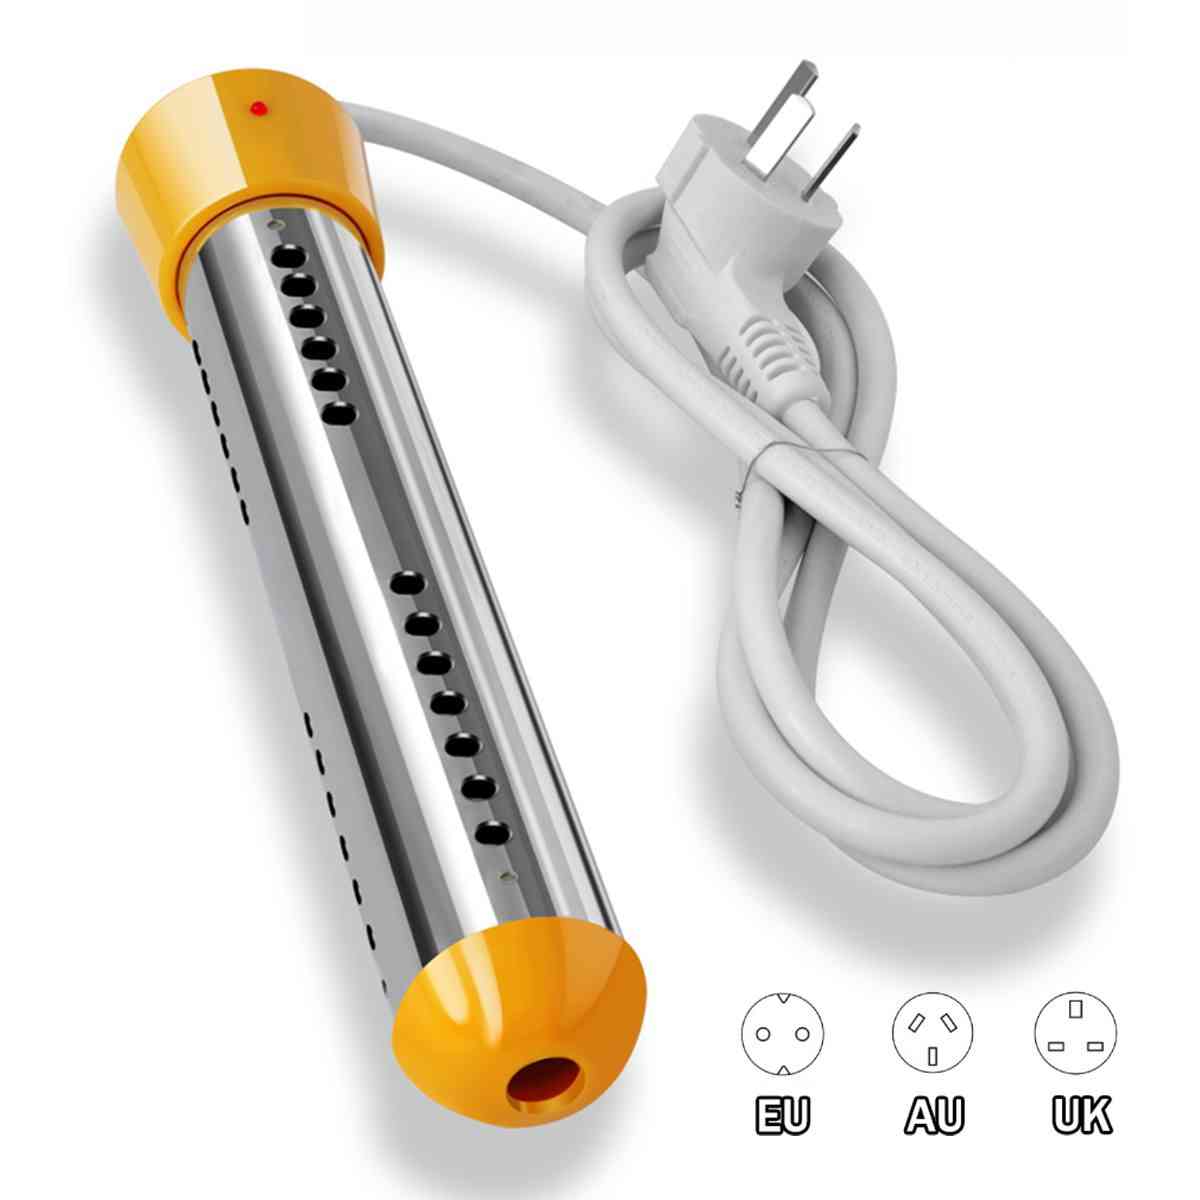 2000w Electric Water Heating Element, Portable Immersion Suspension